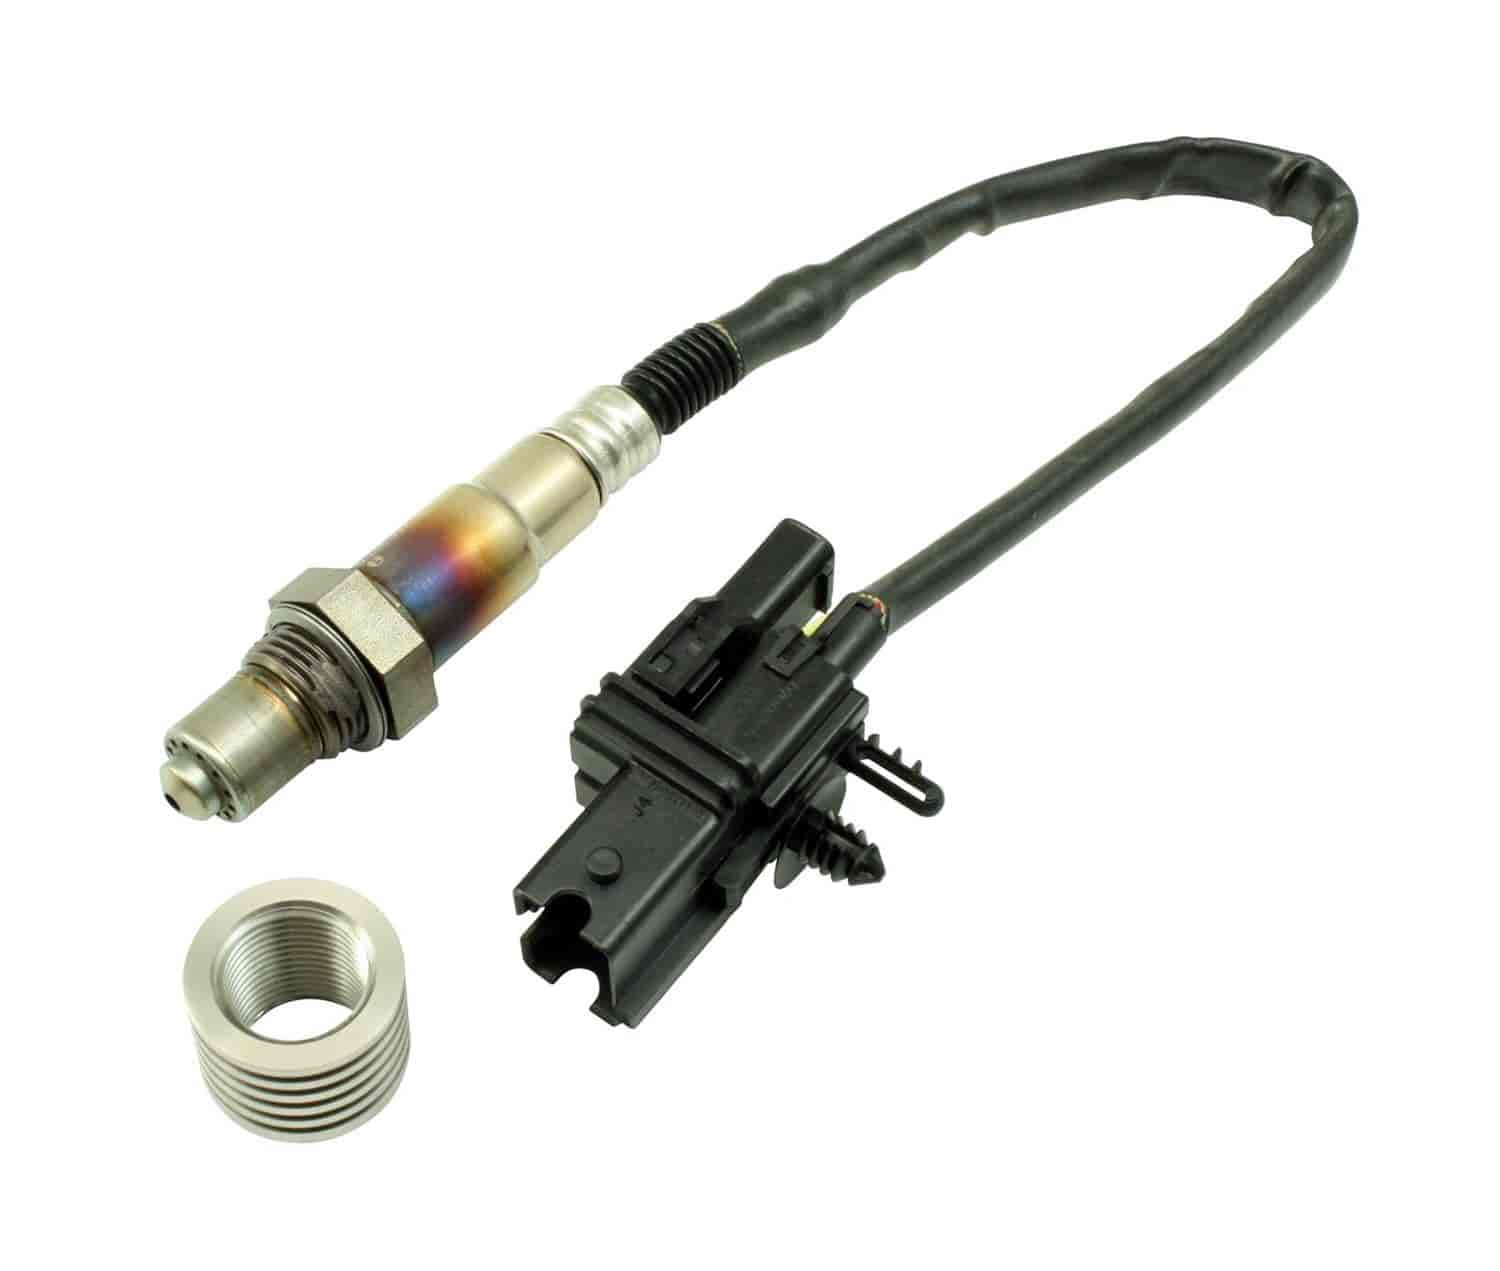 Replacement Sensor and Bung Kit Includes a Bosch